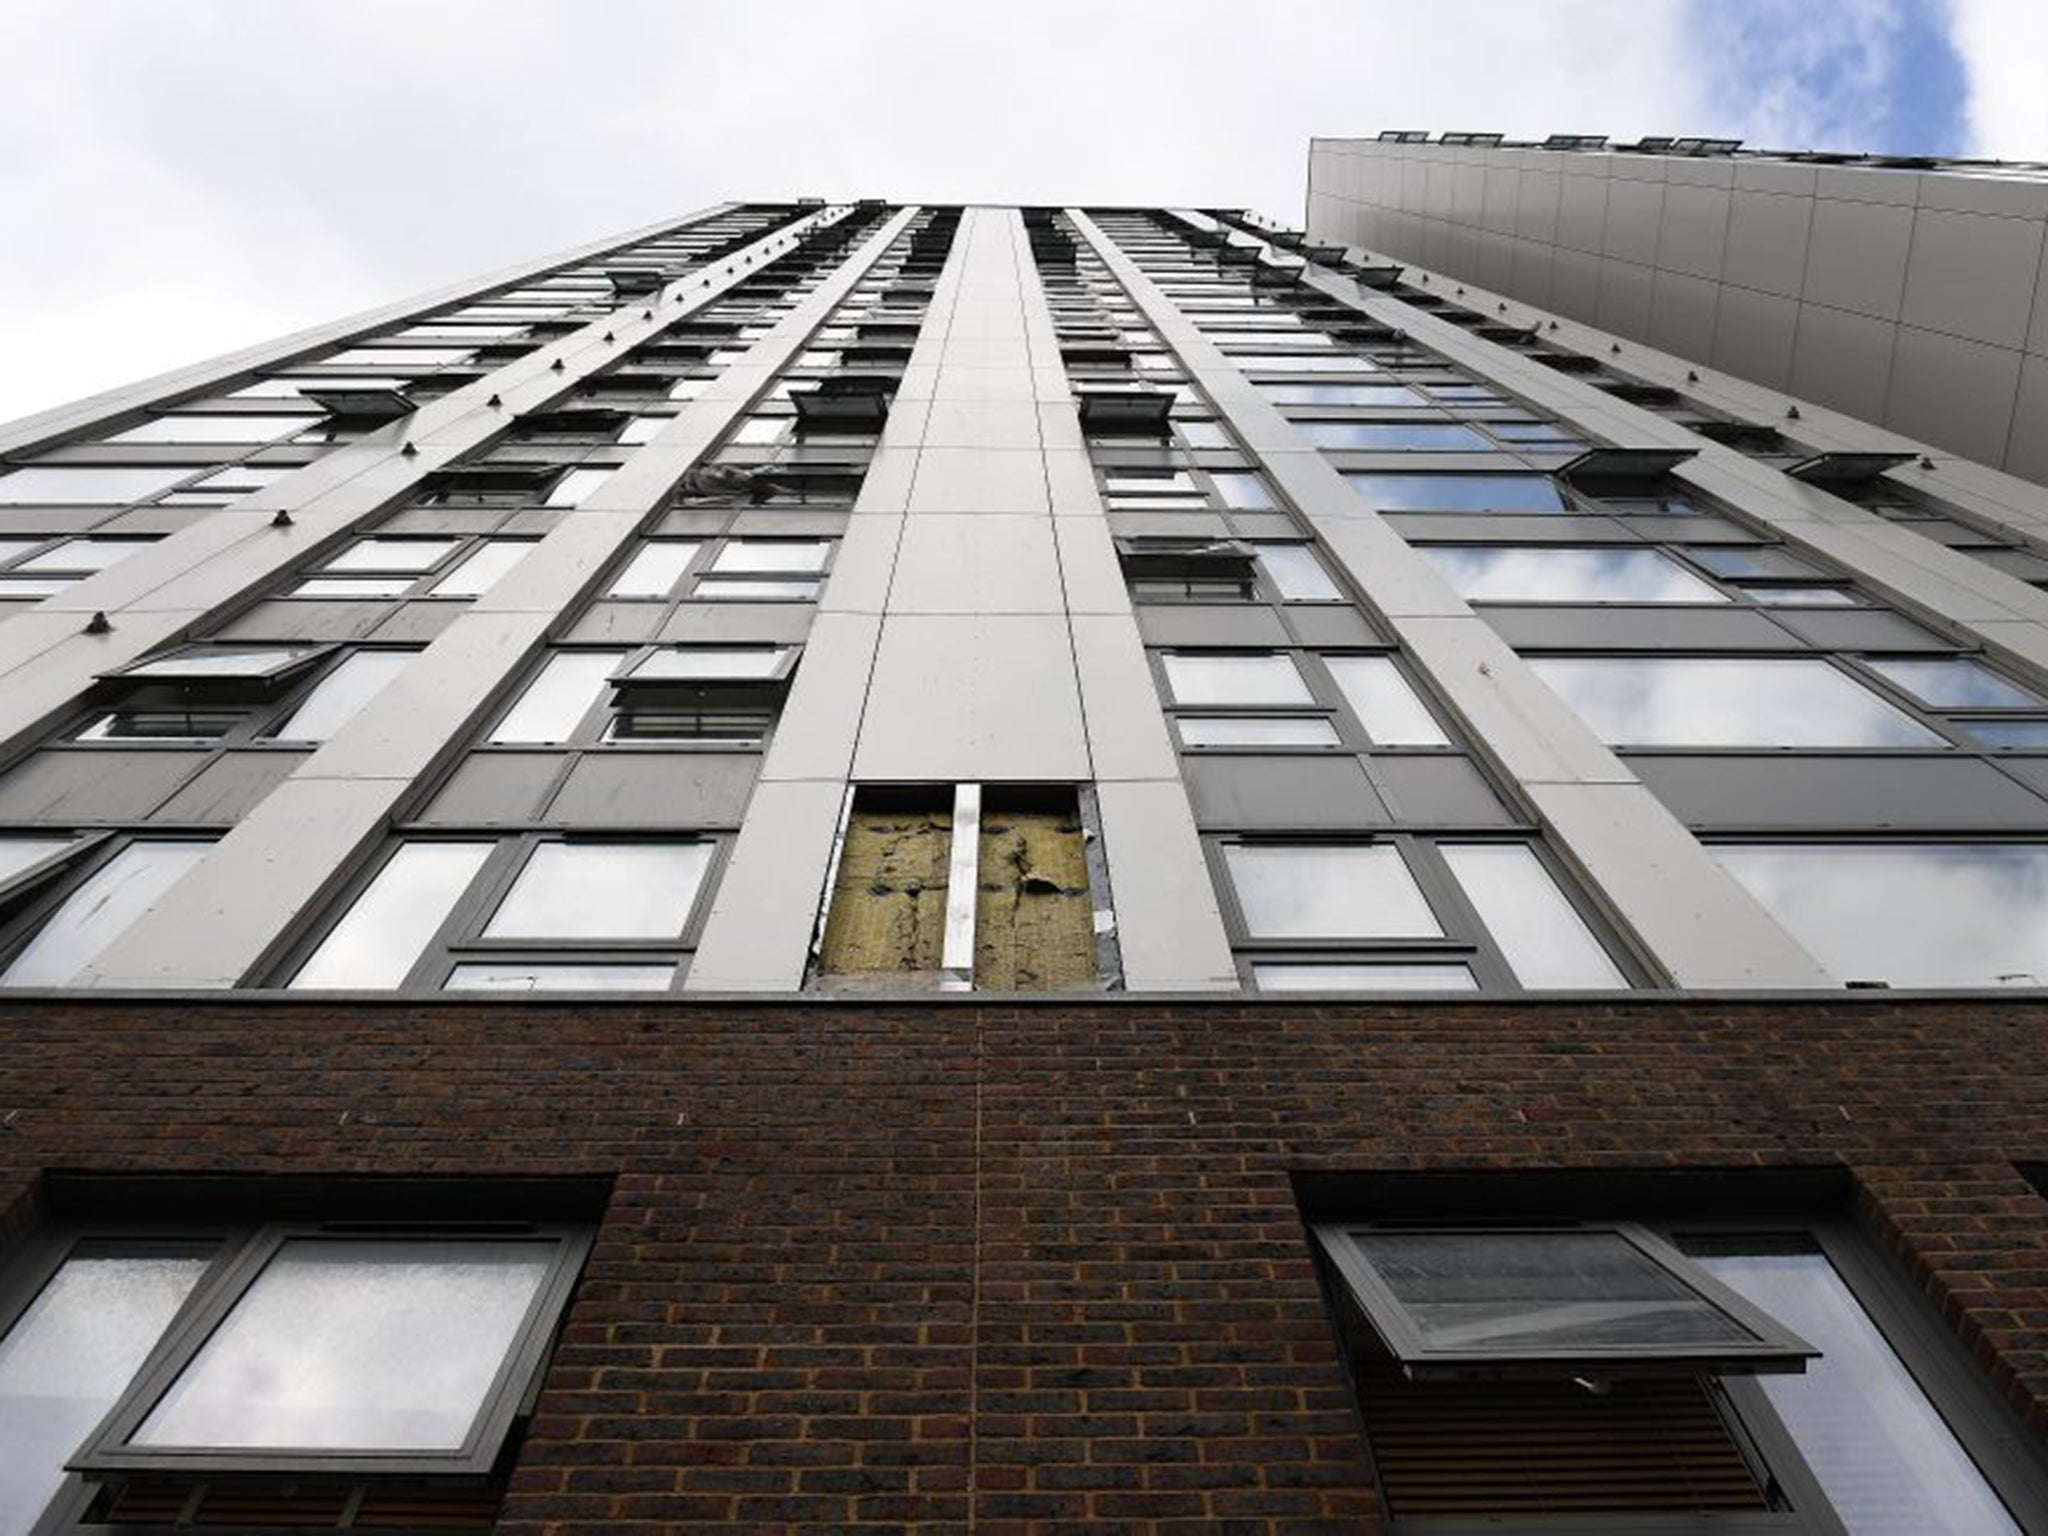 Camden council has started removing cladding from five of its council blocks after testing found it was flammable